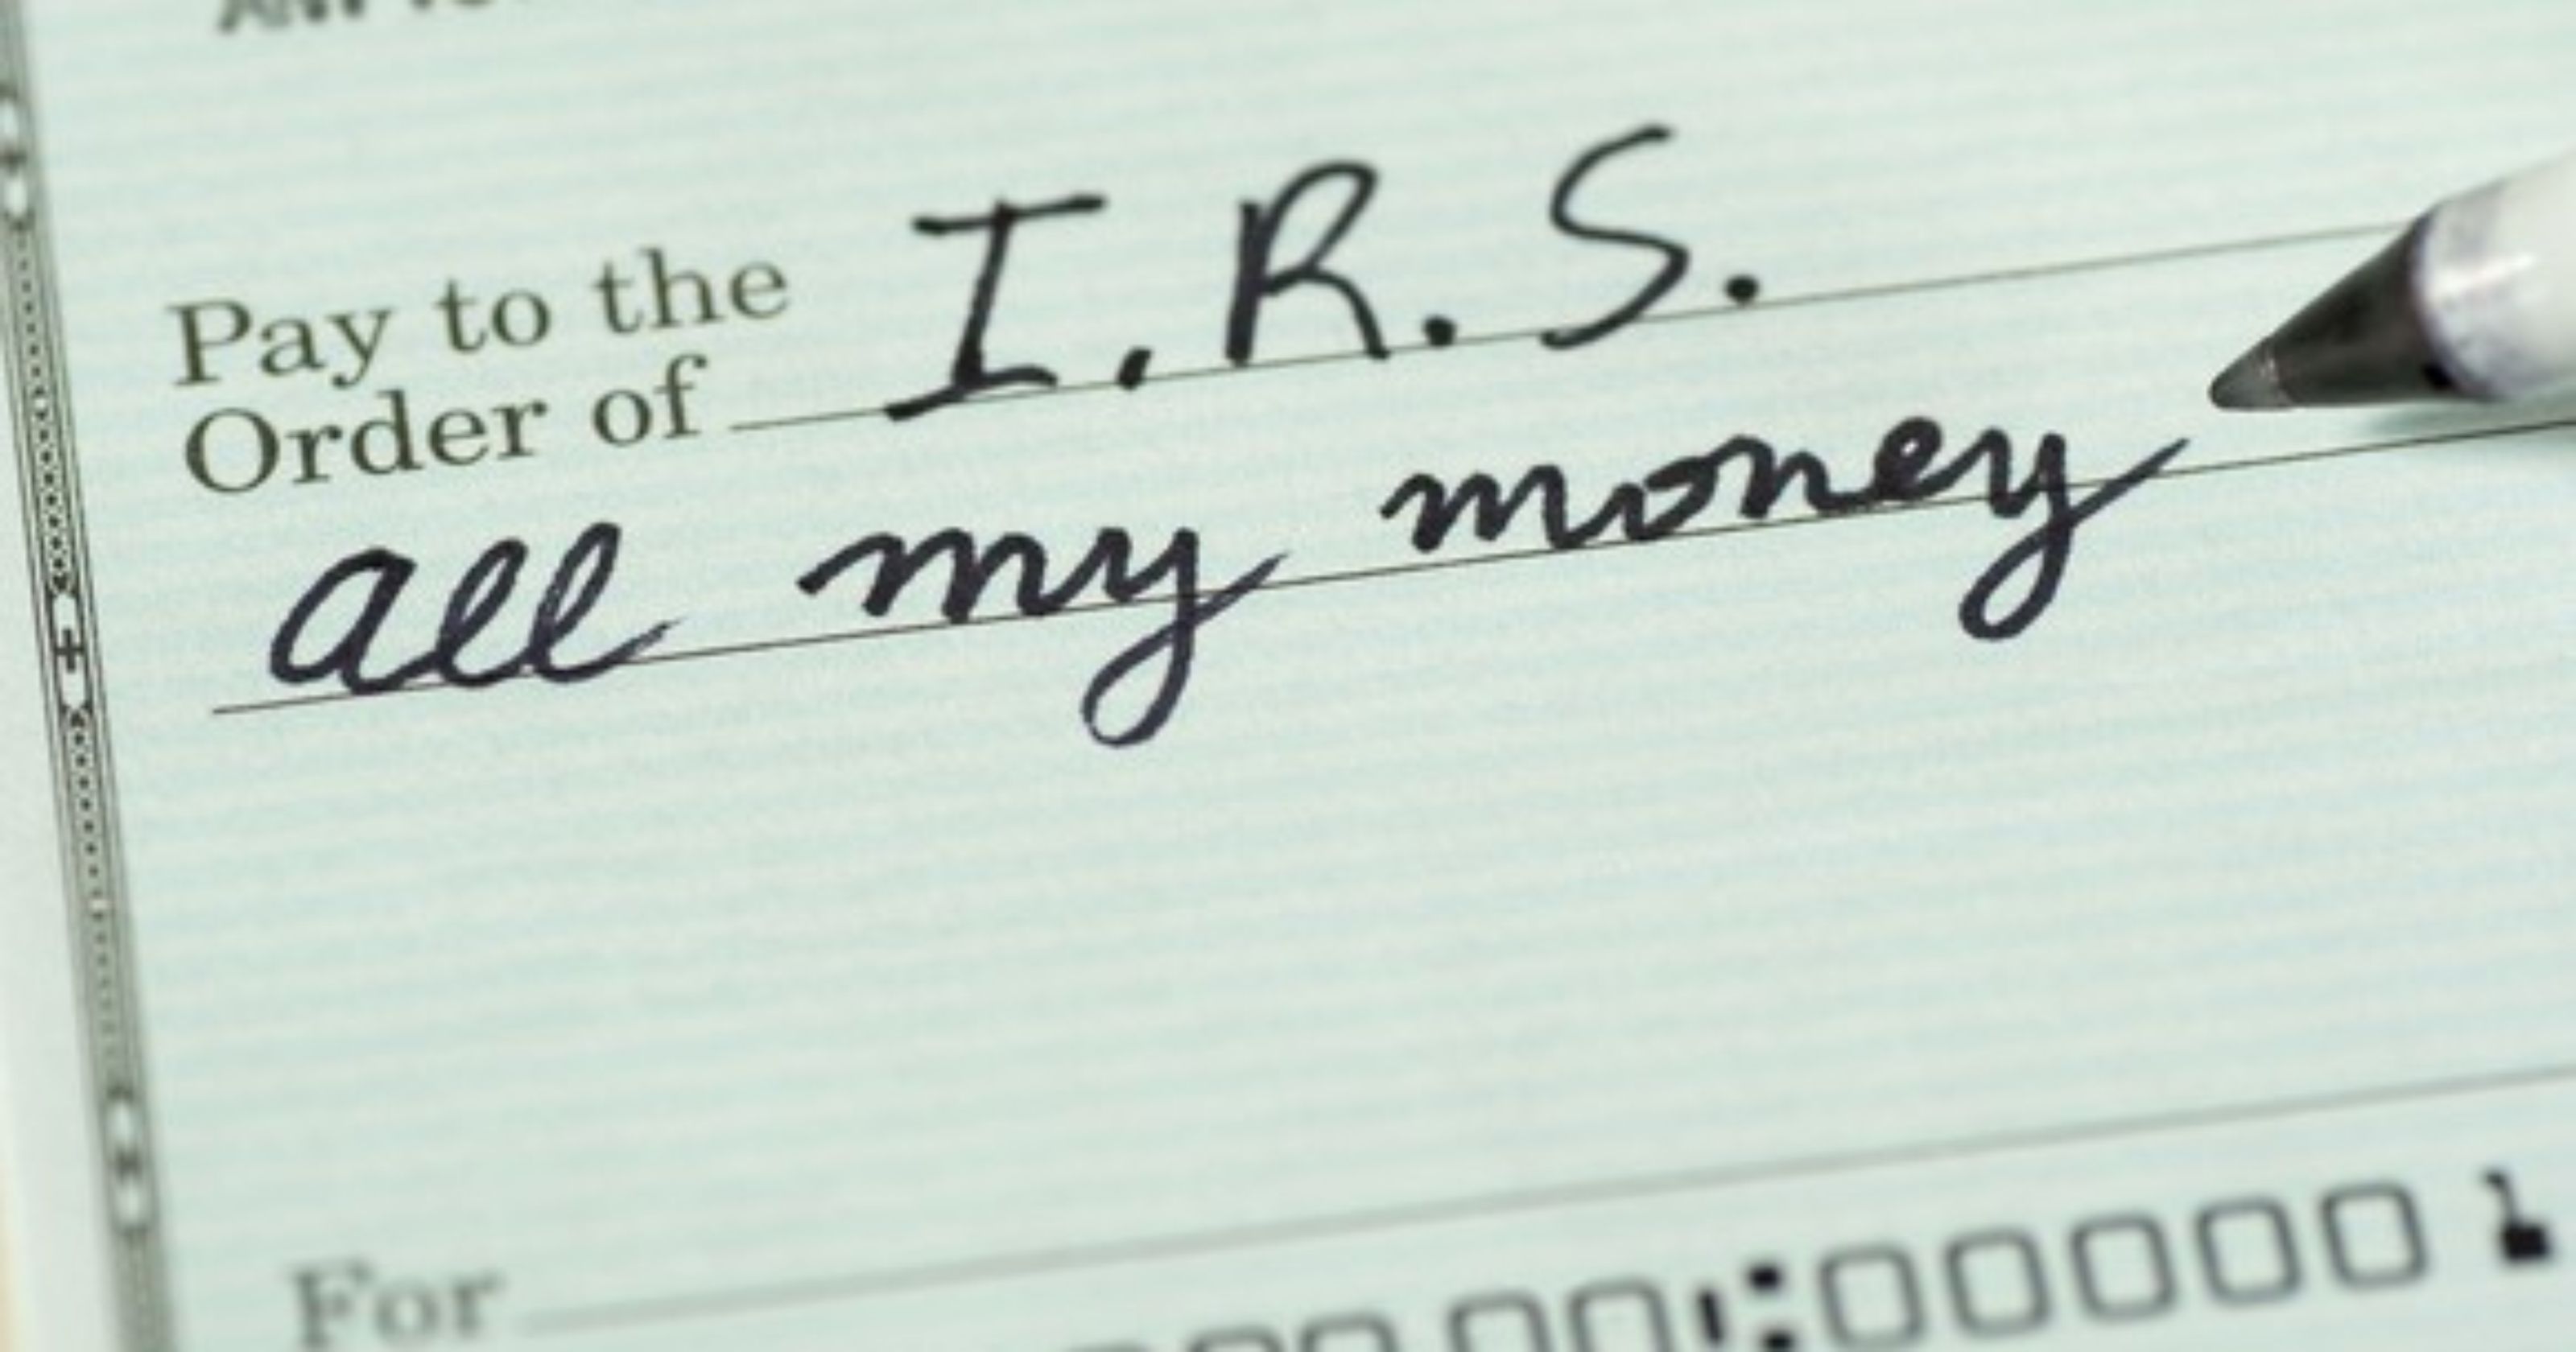 check-to-irs-for-all-my-money-tax_large.jpg